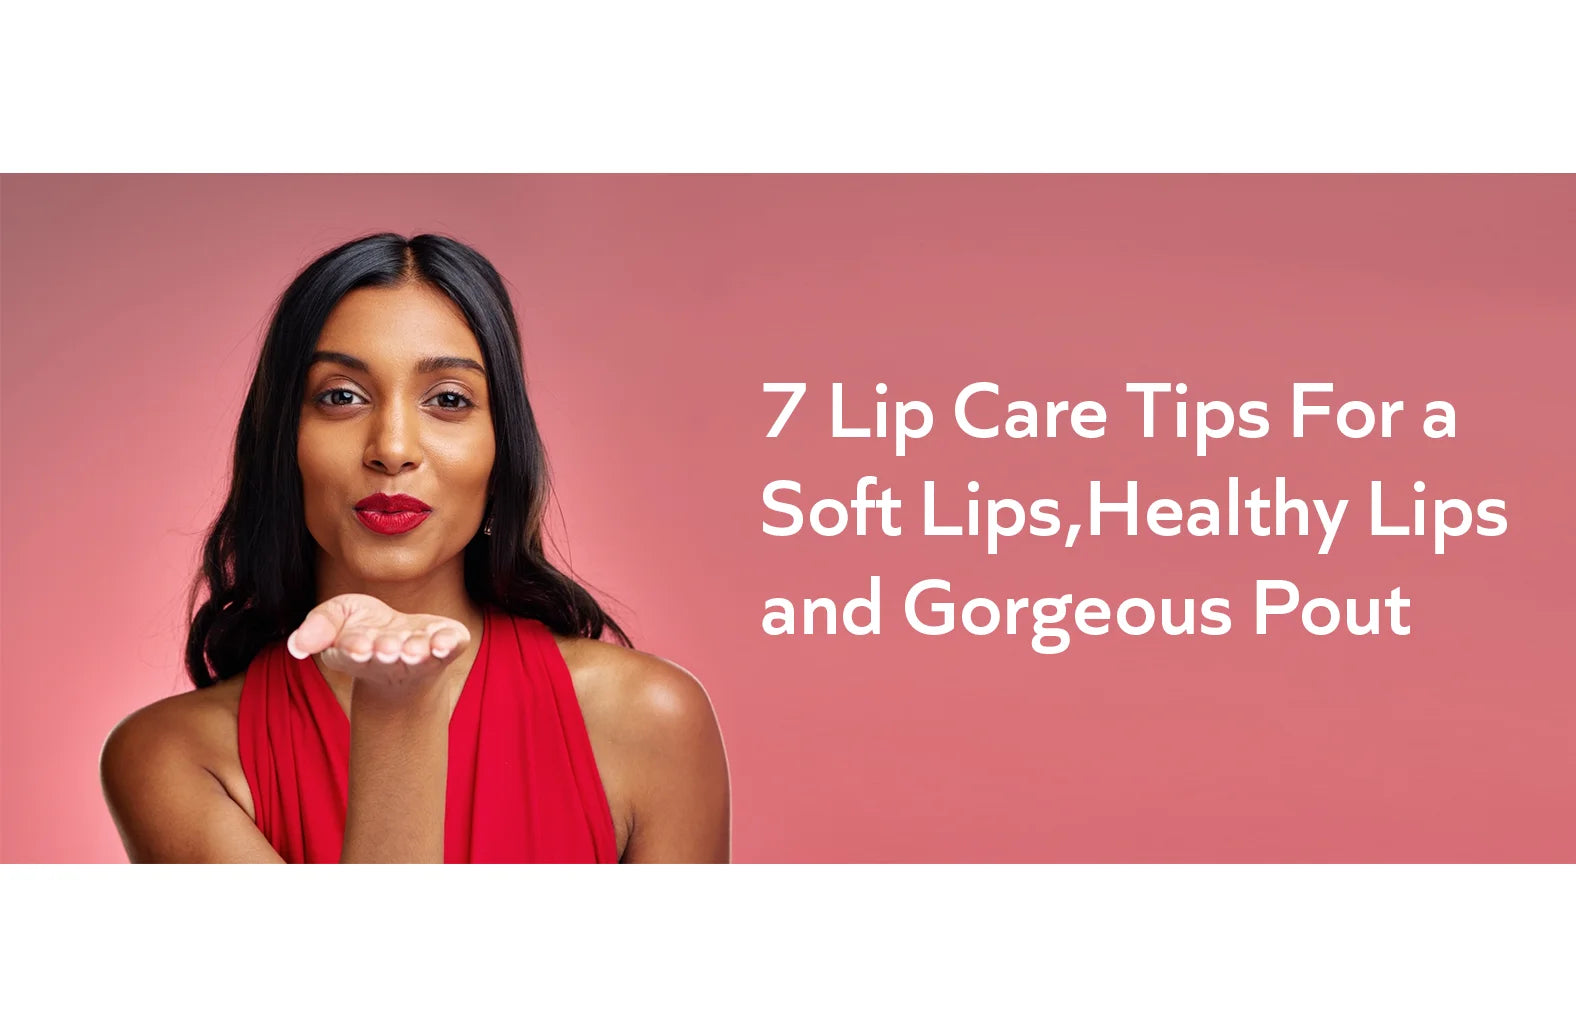 7 Lip Care Tips For a Soft Lips, Healthy Lips and Gorgeous Pout